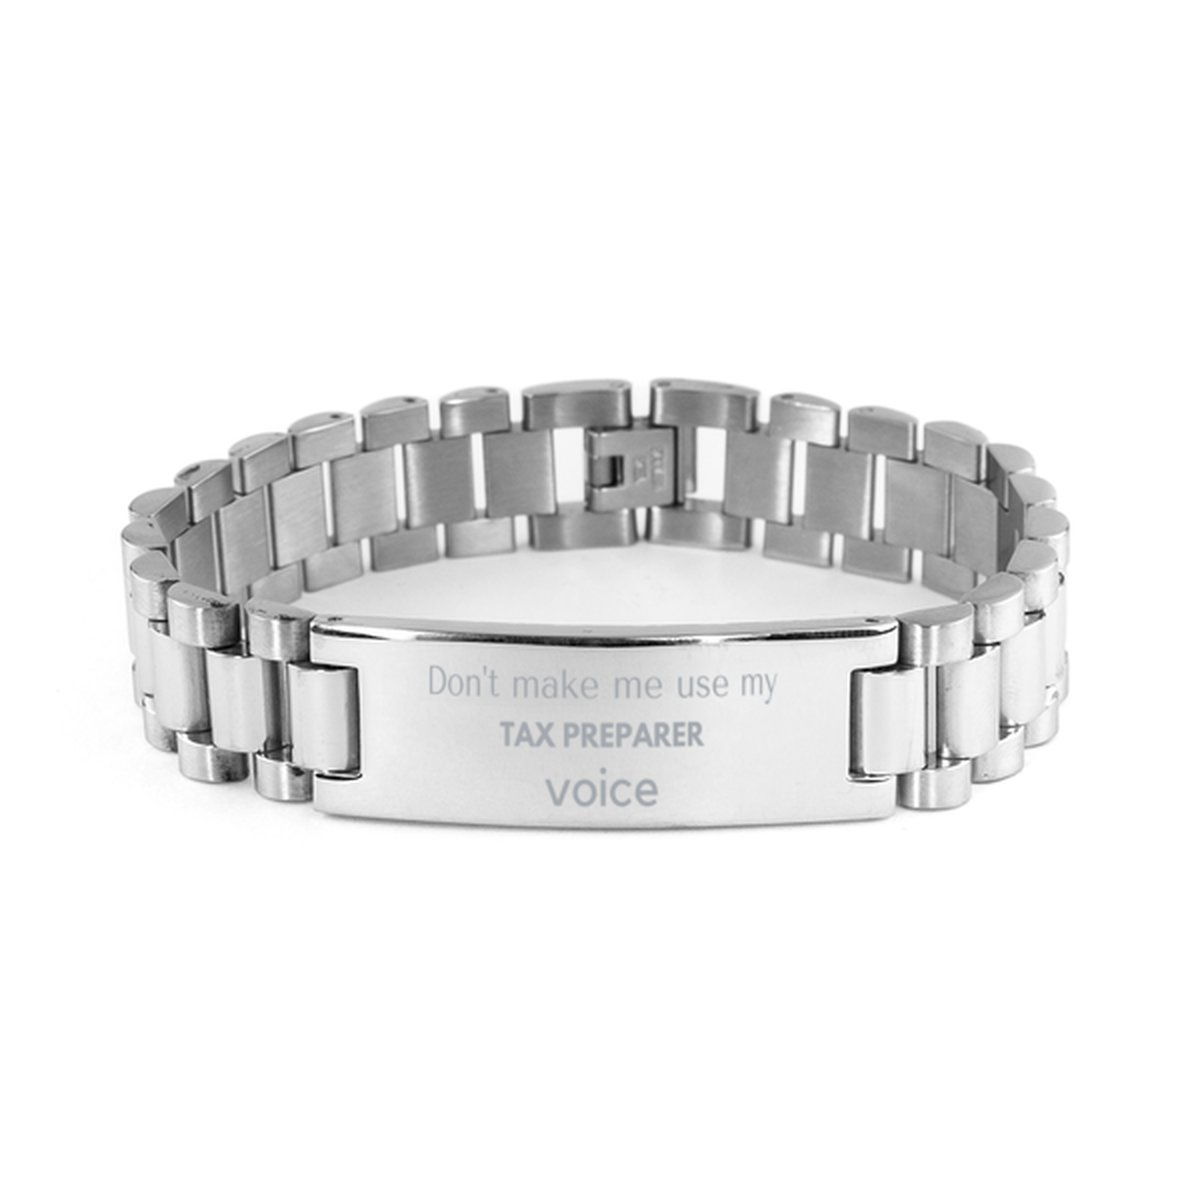 Don't make me use my Tax Preparer voice, Sarcasm Tax Preparer Gifts, Christmas Tax Preparer Ladder Stainless Steel Bracelet Birthday Unique Gifts For Tax Preparer Coworkers, Men, Women, Colleague, Friends